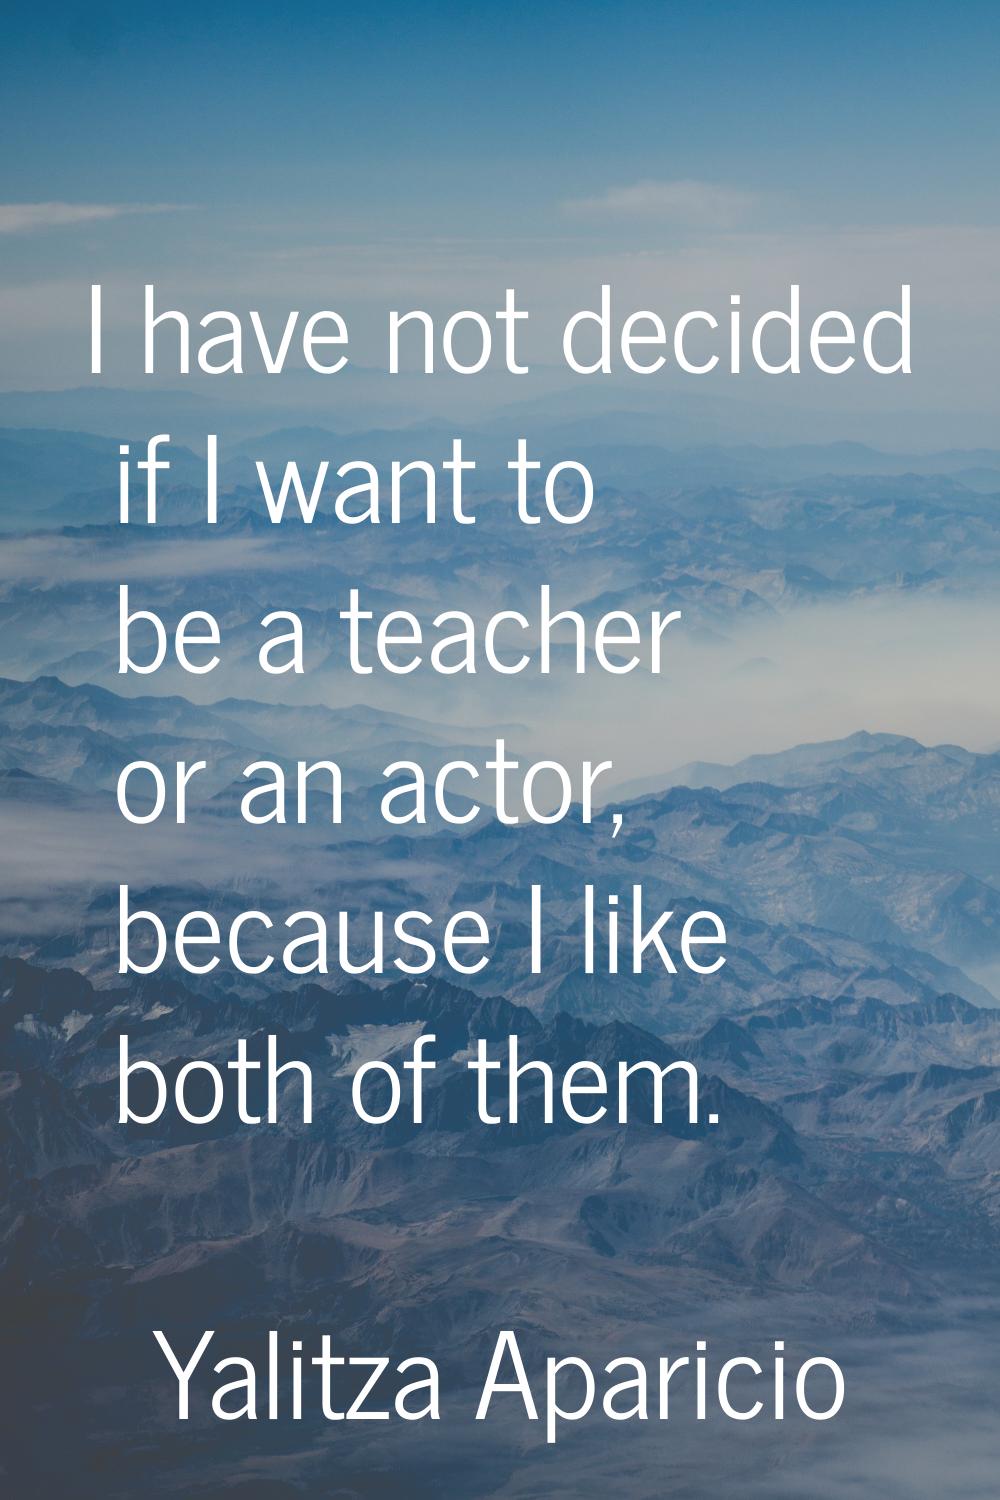 I have not decided if I want to be a teacher or an actor, because I like both of them.